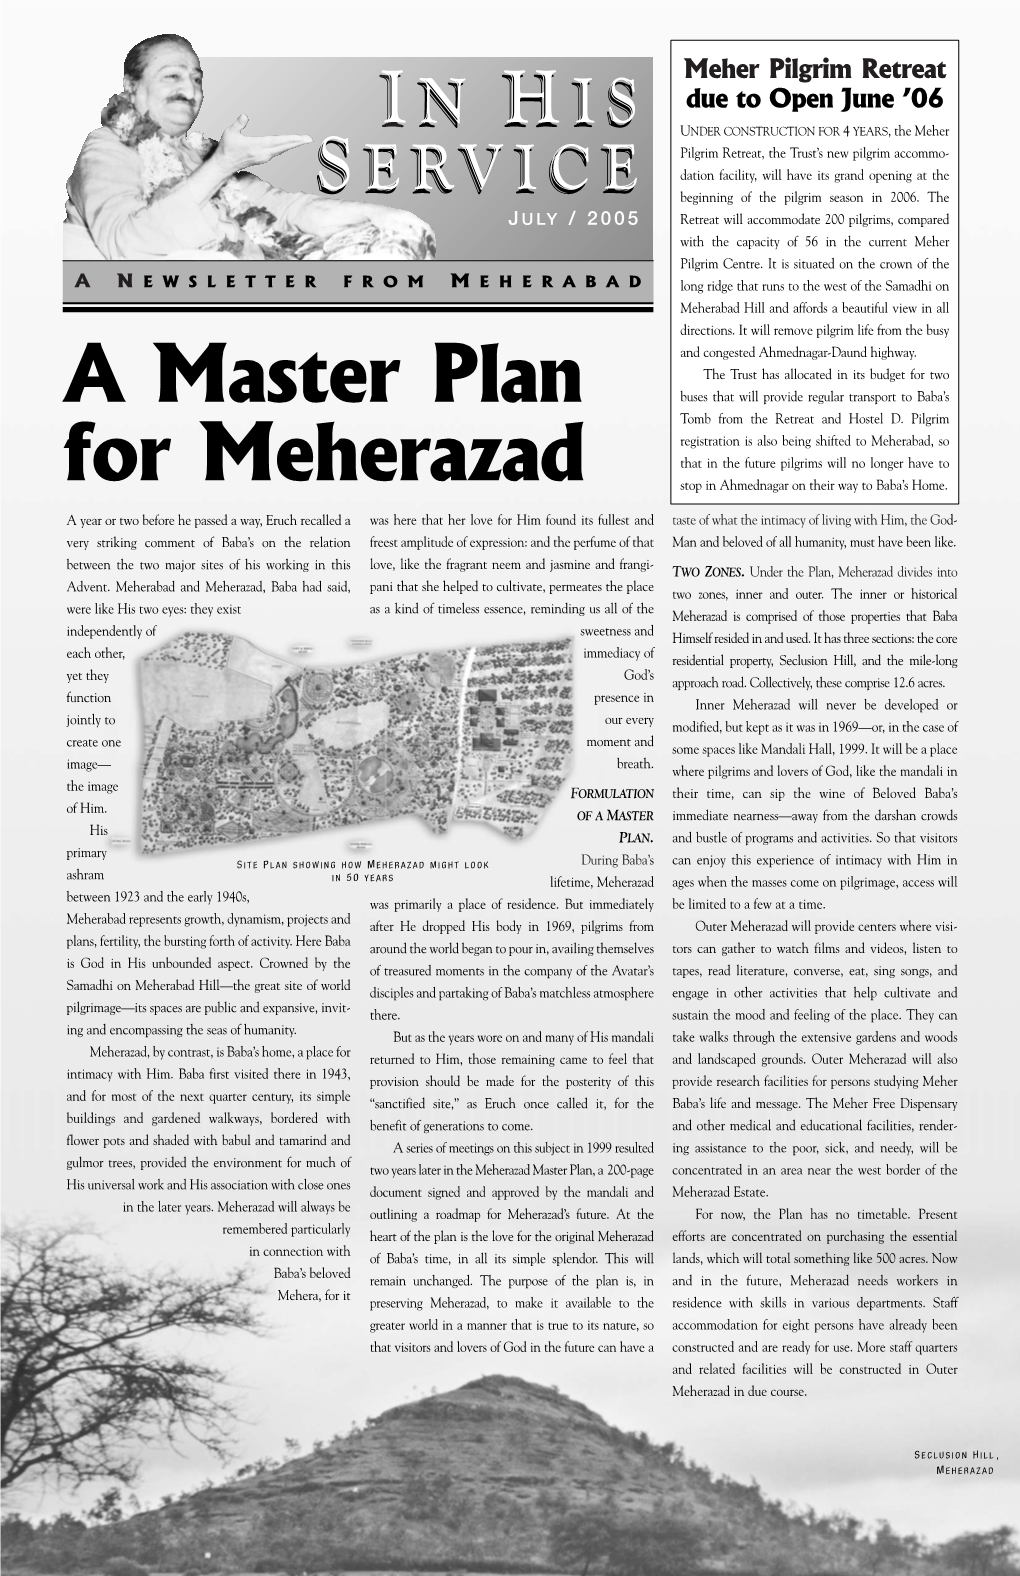 A Master Plan for Meherazad